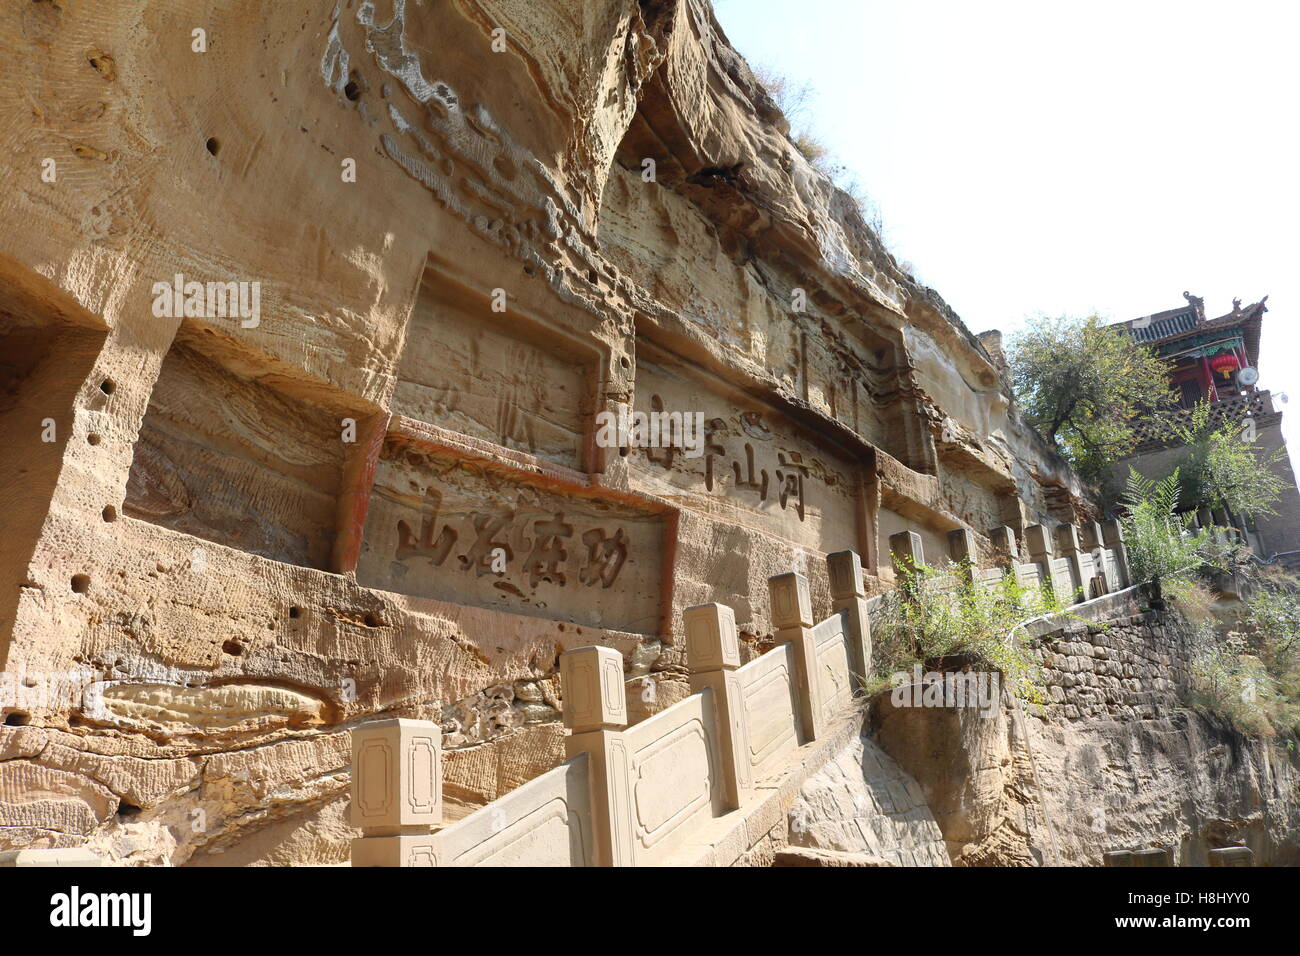 ancient Chinese carvings on wall in Guangzhou Stock Photo